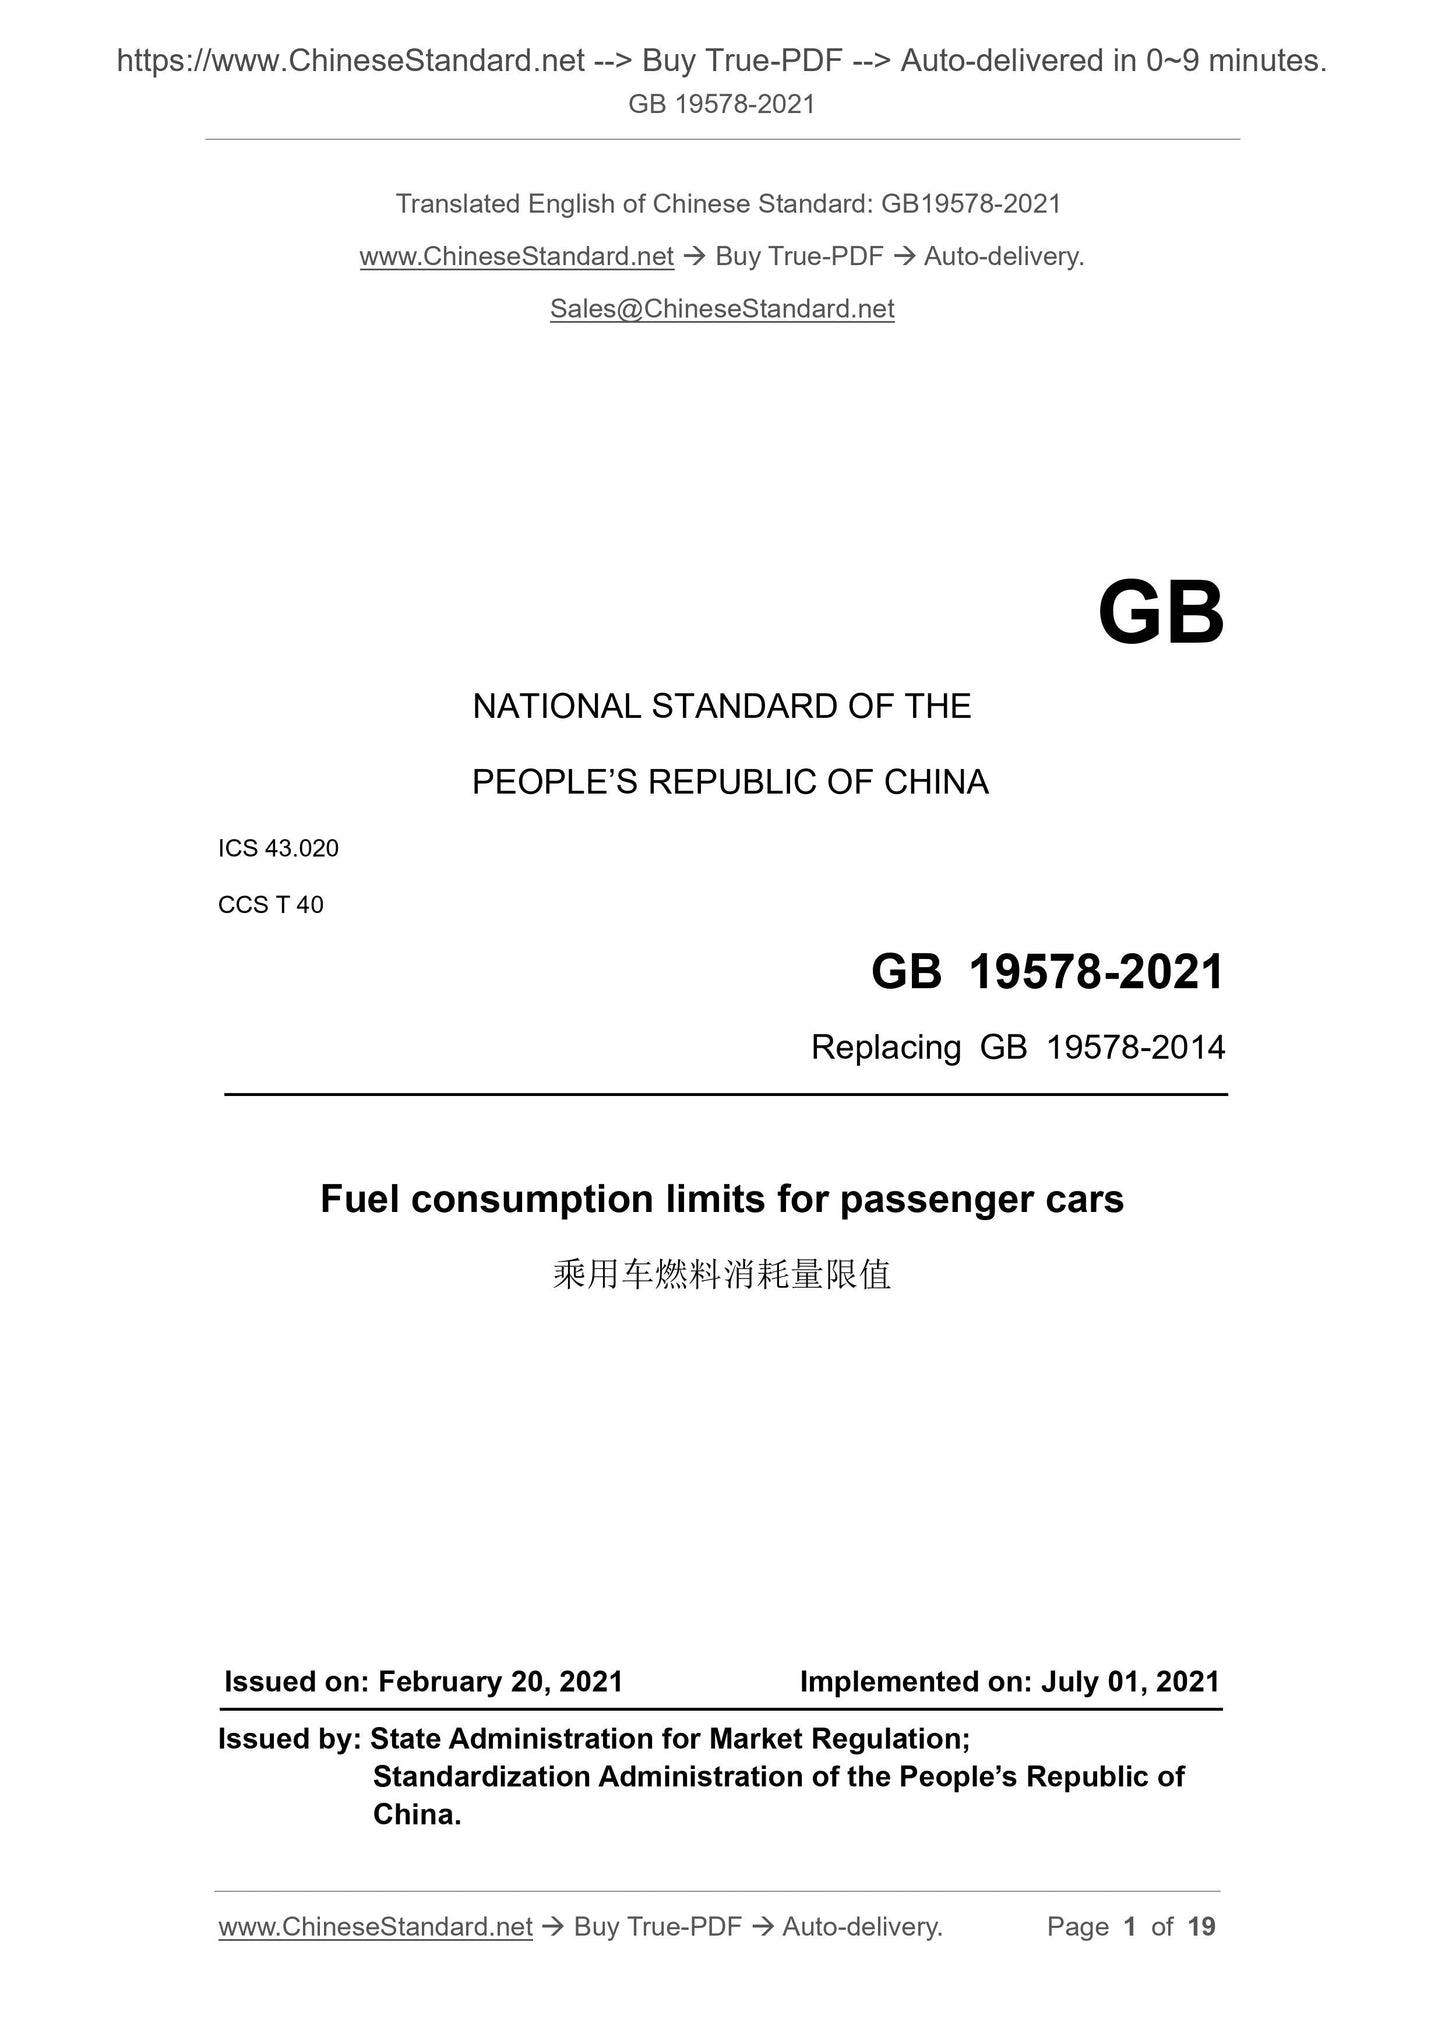 GB 19578-2021 Page 1